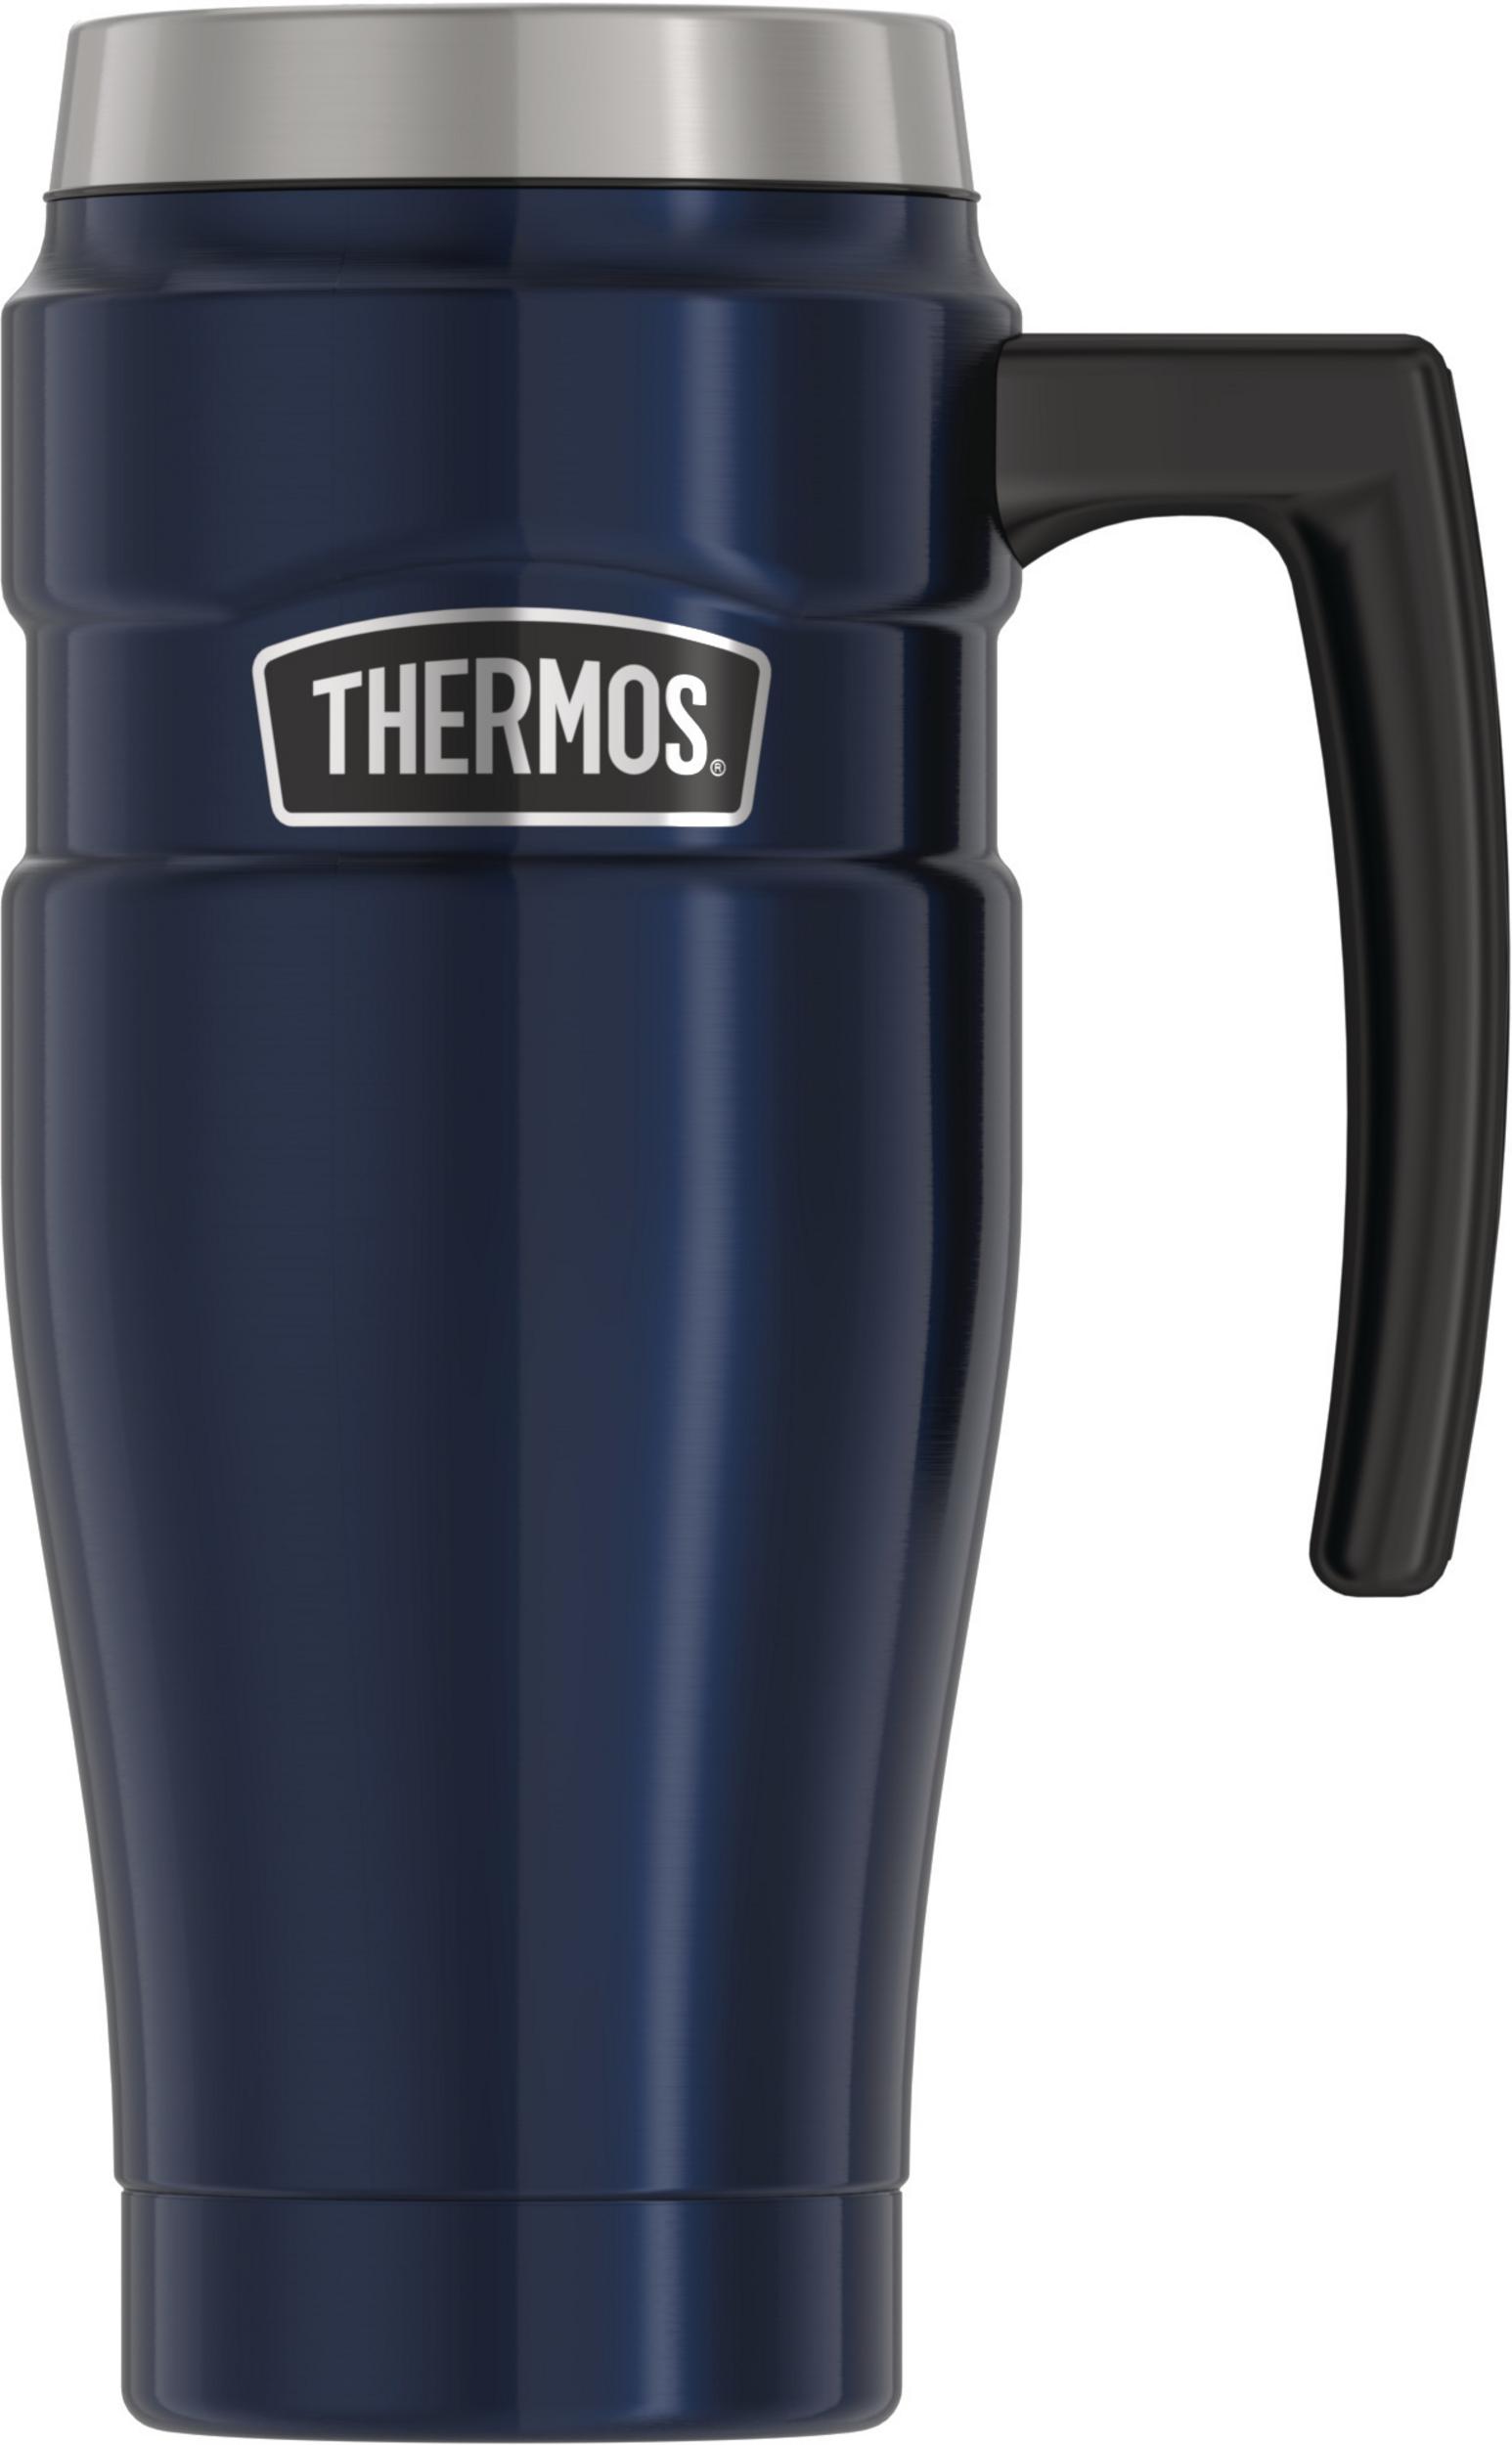 Thermos for coffee and hot chocolate rental in montreal